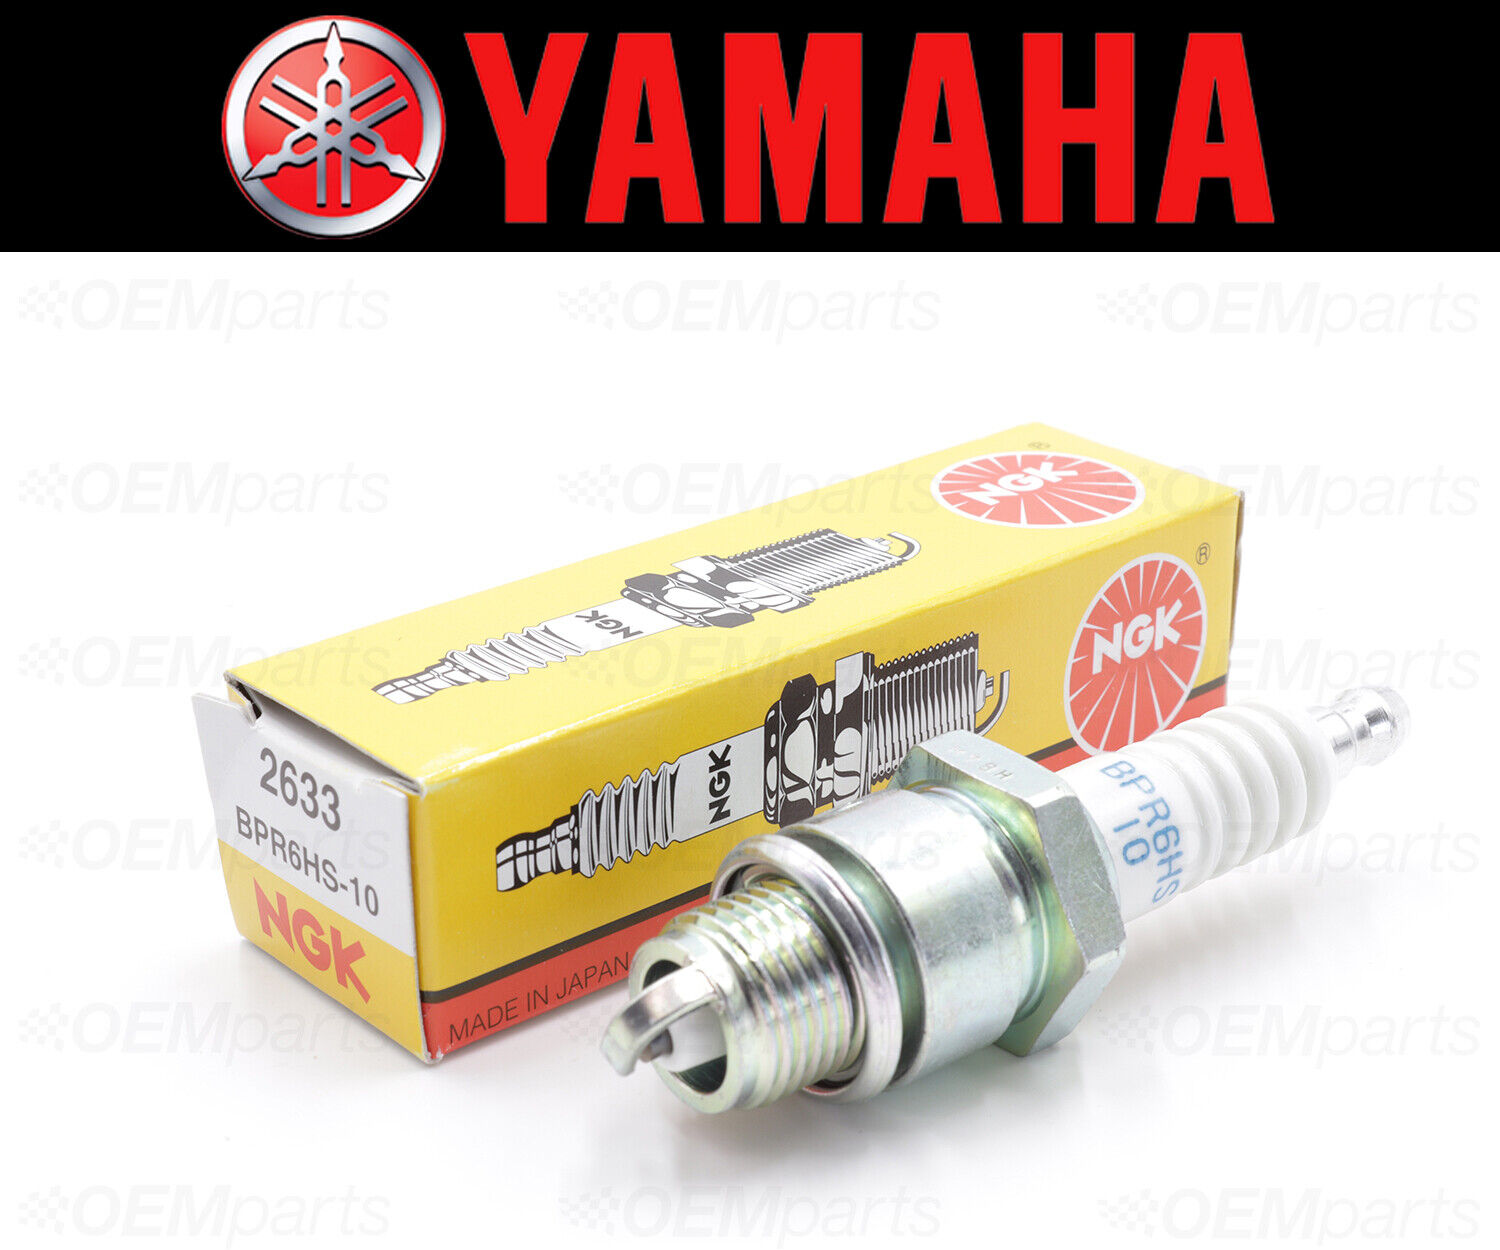 1x NGK BPR6HS-10 Spark Plugs Yamaha See Fitment Chart #94701-00292-00